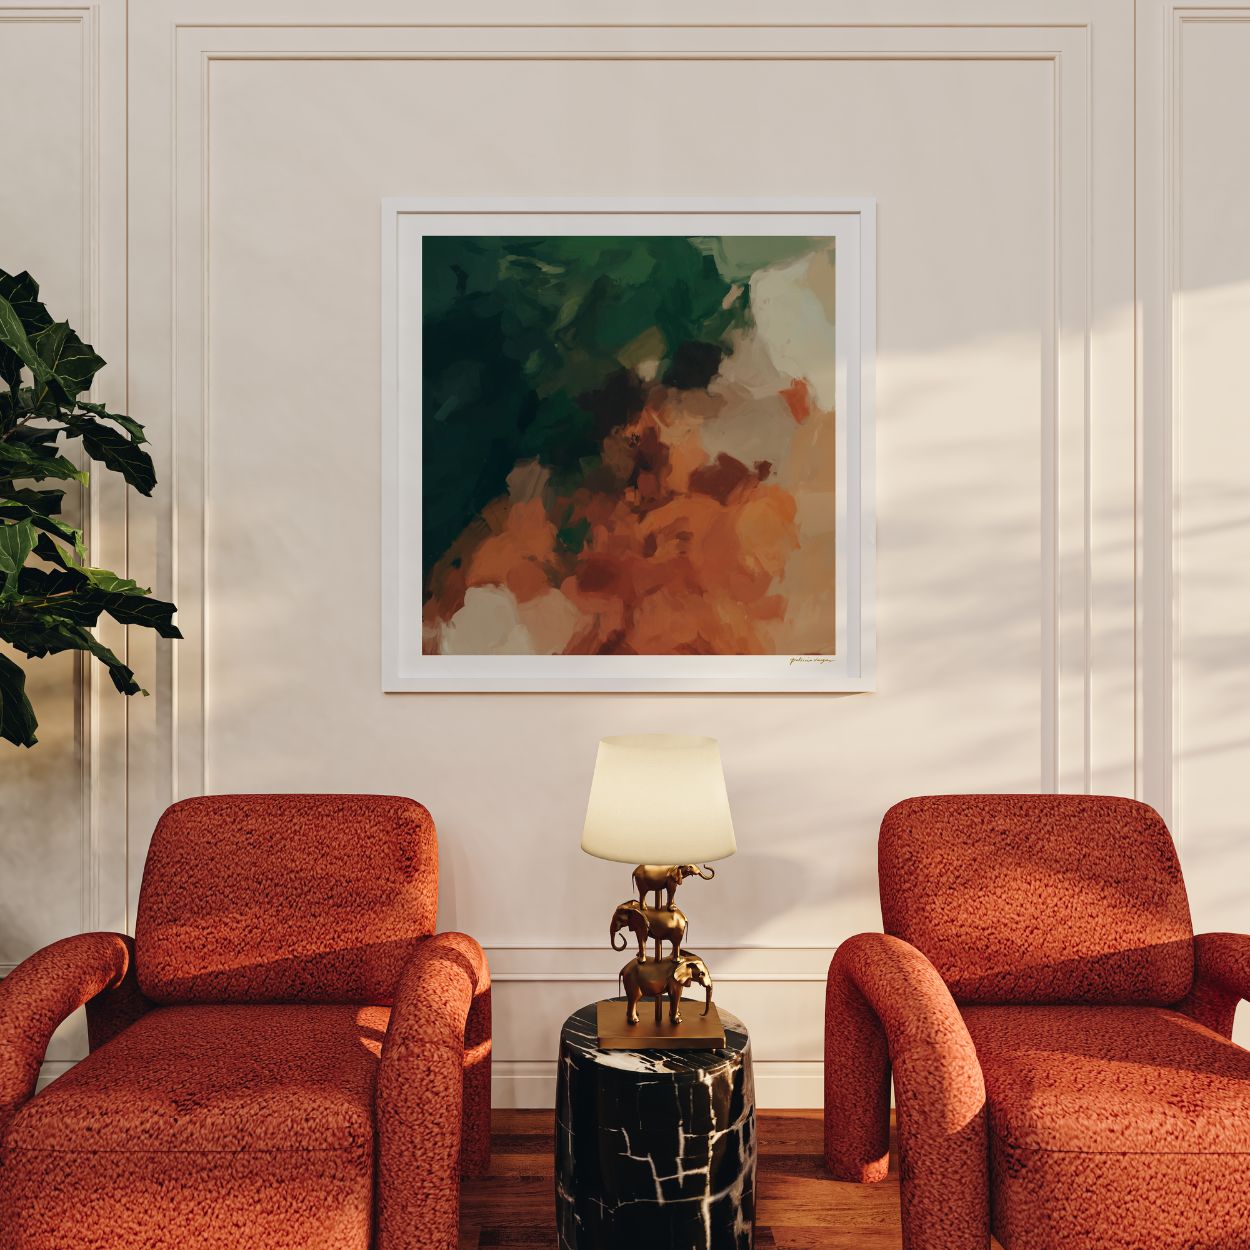 Cedar, green and orange colorful abstract wall art print by Parima Studio. Oversize art for living room over arm chairs